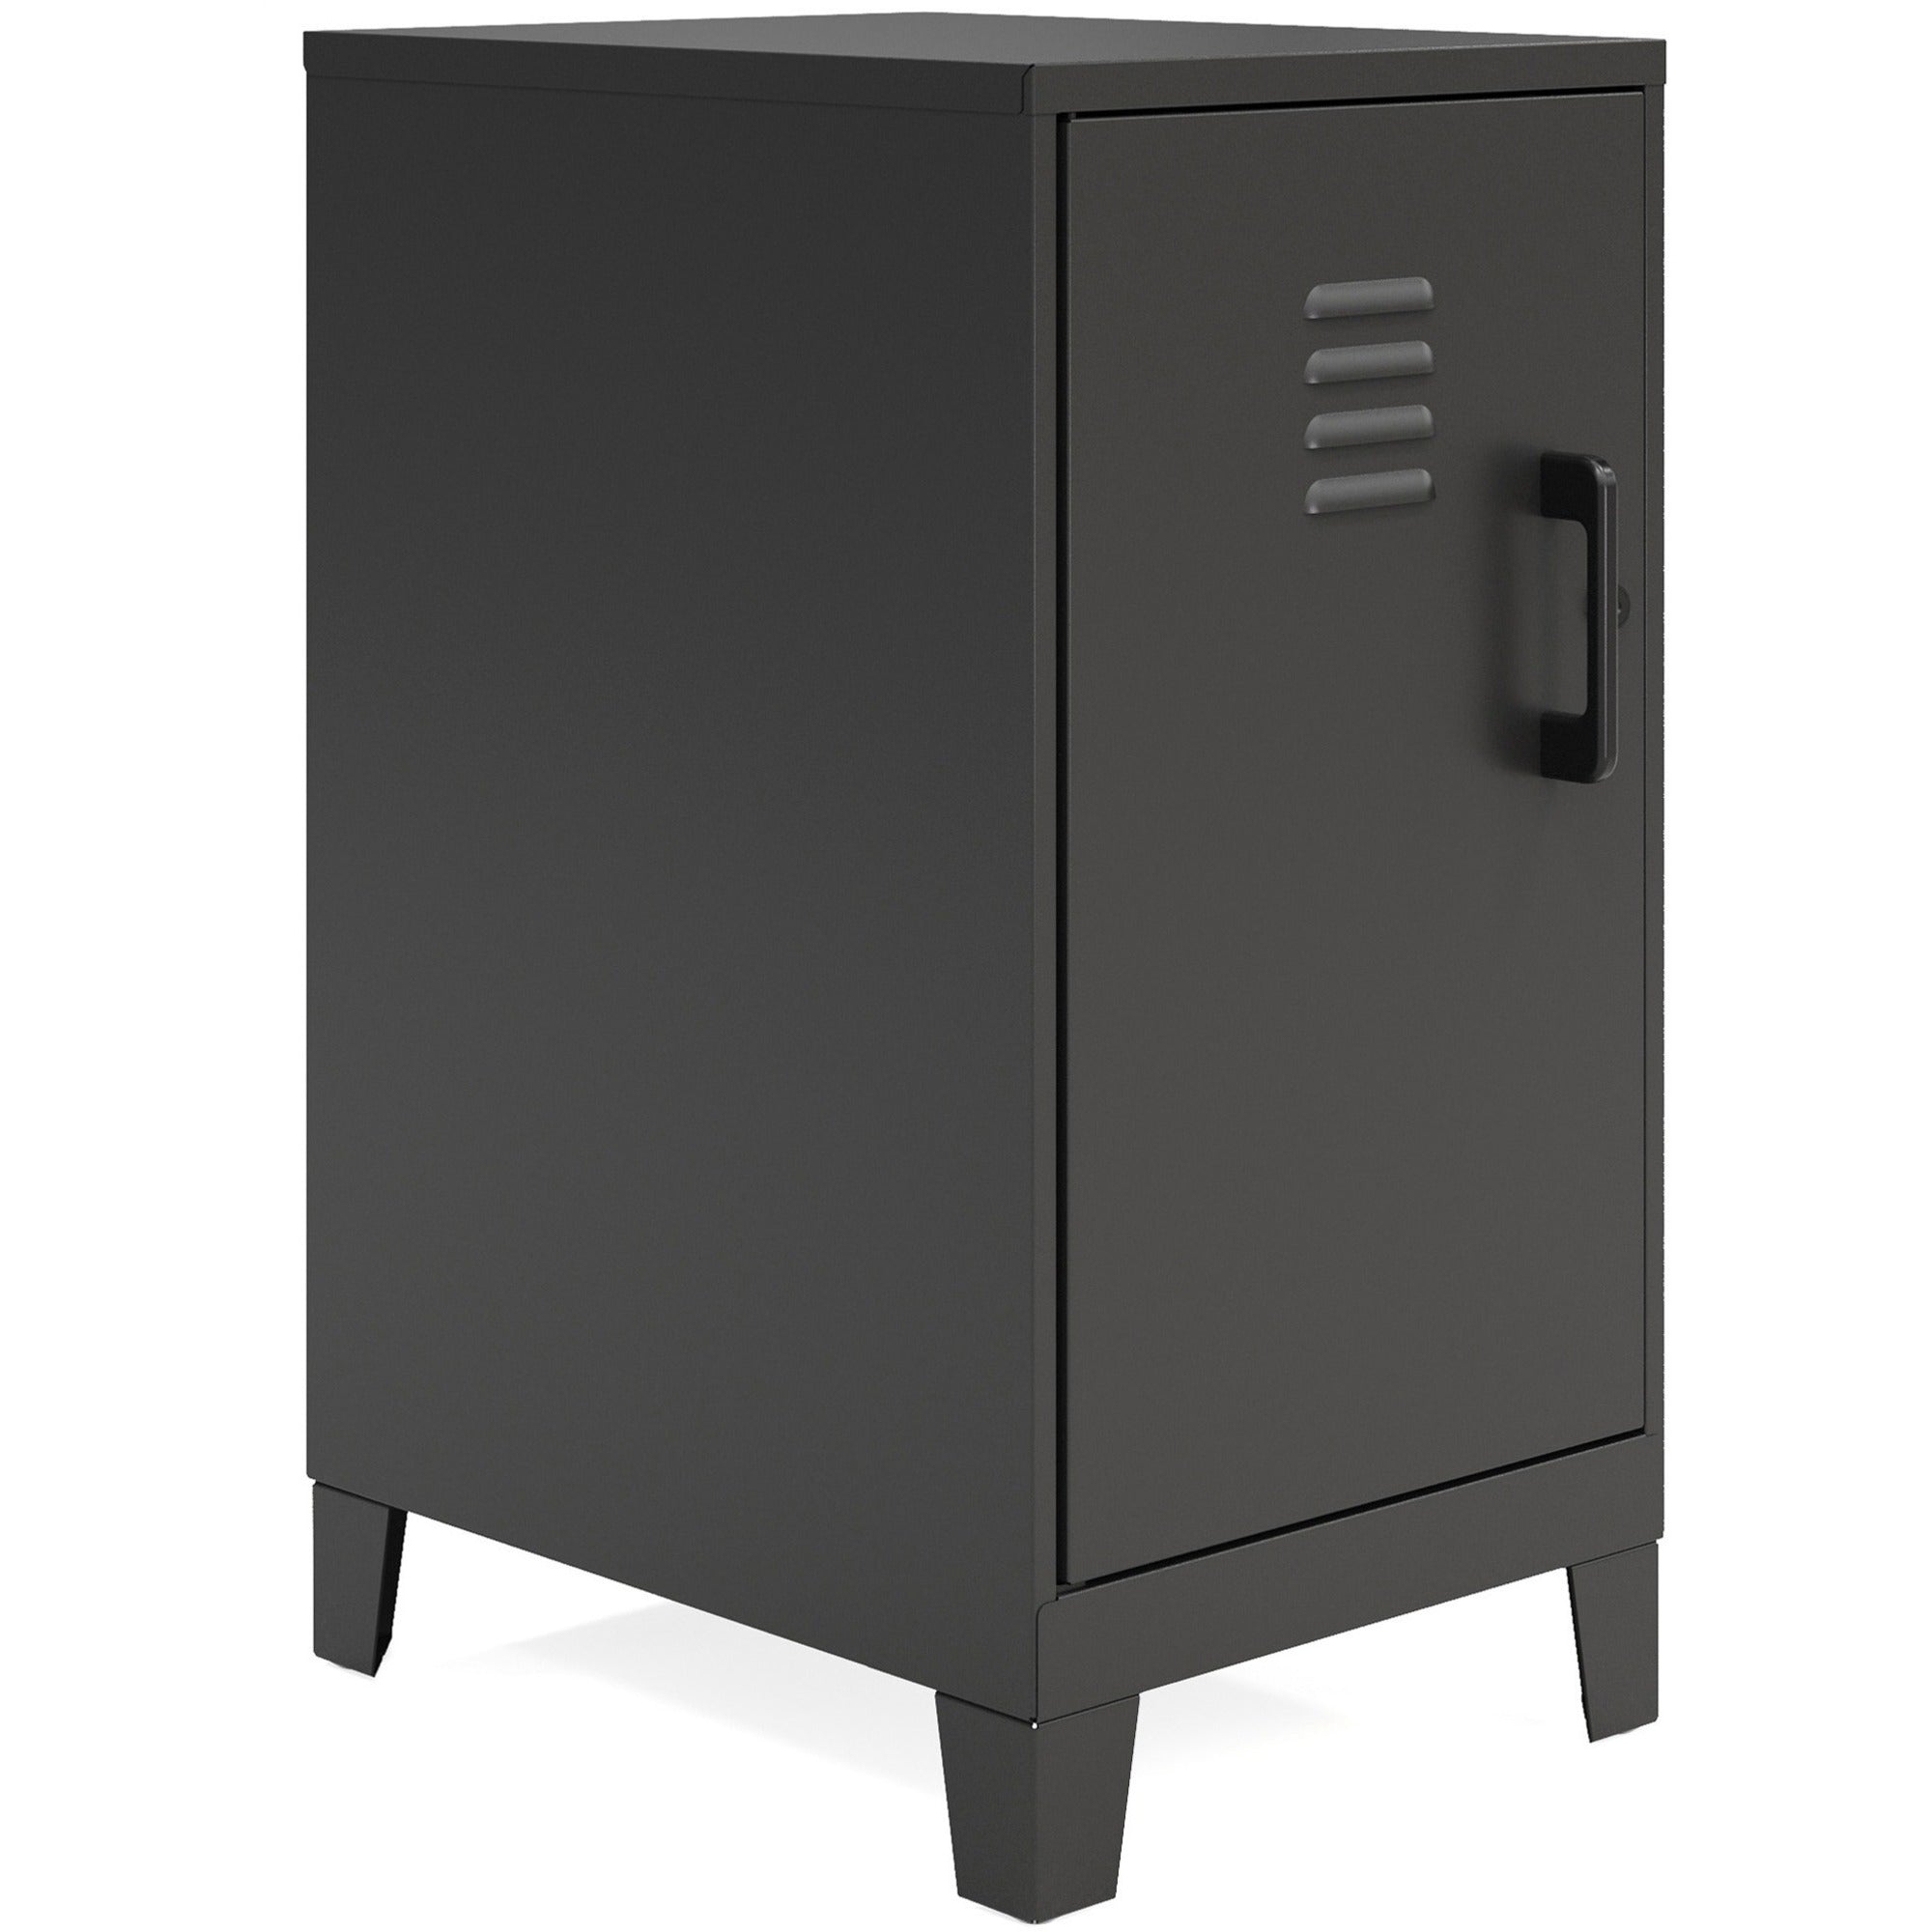 nusparc-personal-locker-2-shelves-for-office-home-sport-equipments-toy-game-classroom-playroom-basement-garage-overall-size-275-x-142-x-18-black-steel-taa-compliant_nprsl218zzbk - 1